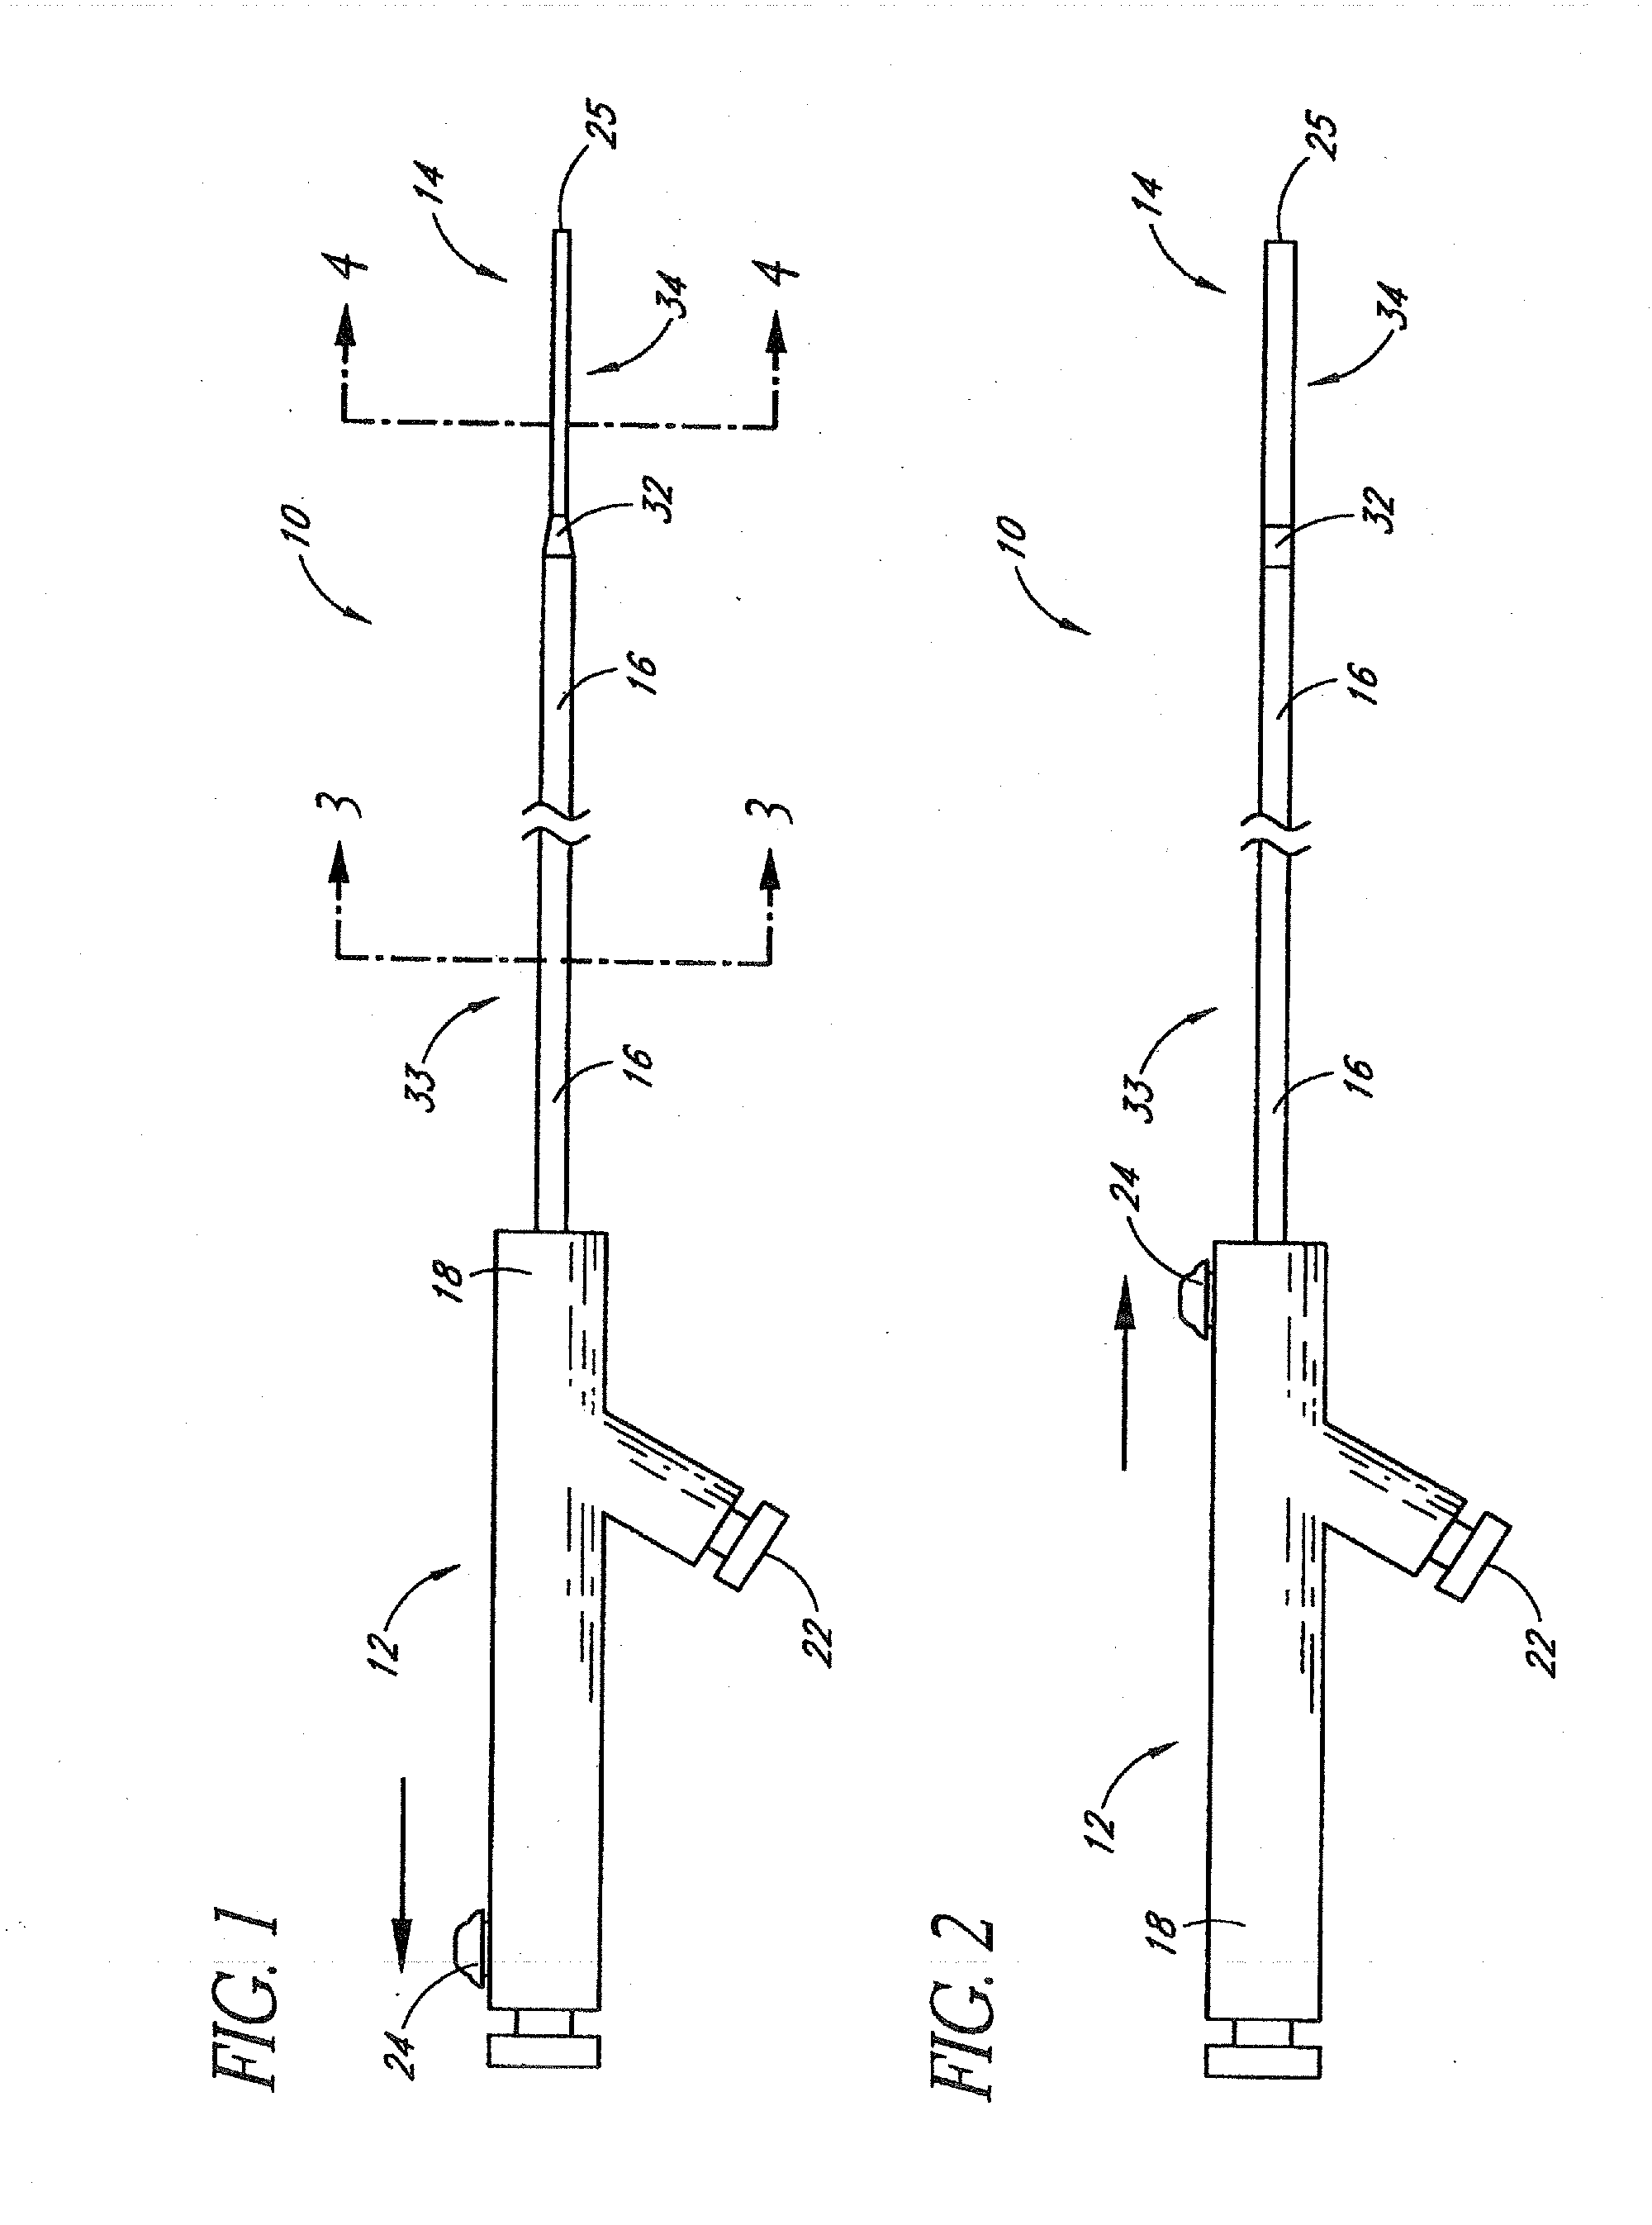 Systems and methods for removing obstructive matter from body lumens and treating vascular defects